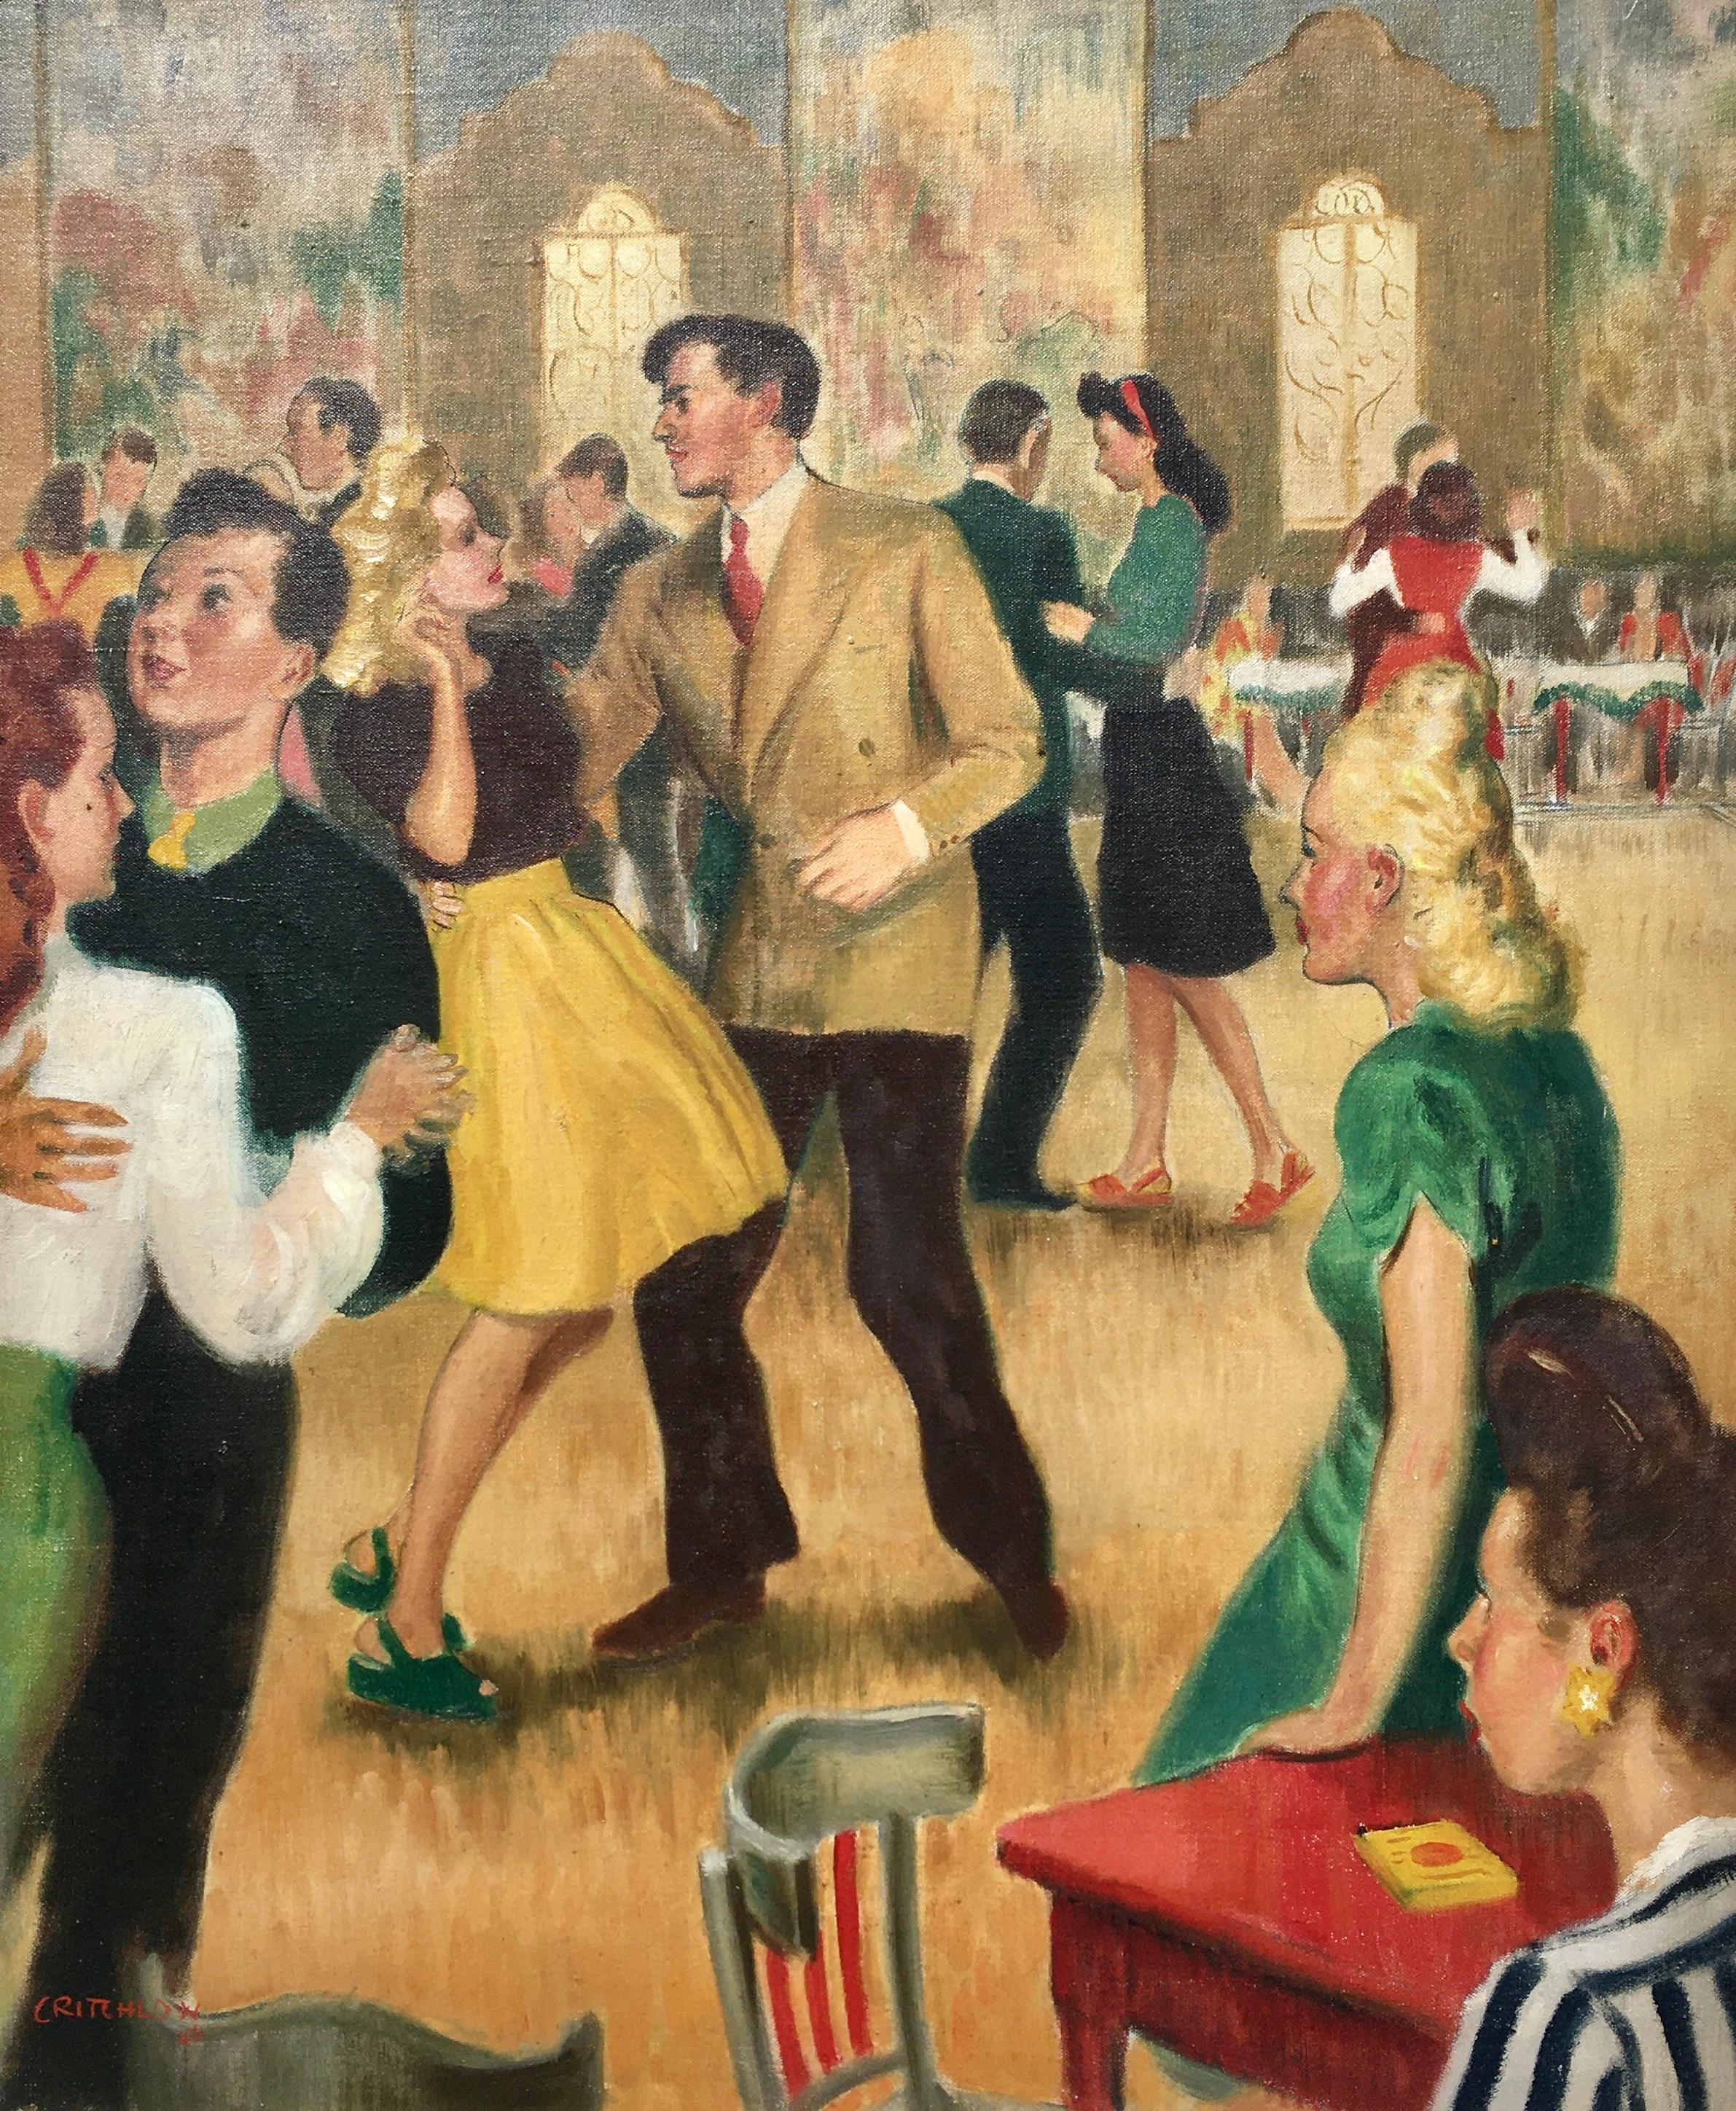 The Dancehall - 1940s Modern British oil painting by Jerry Critchlow